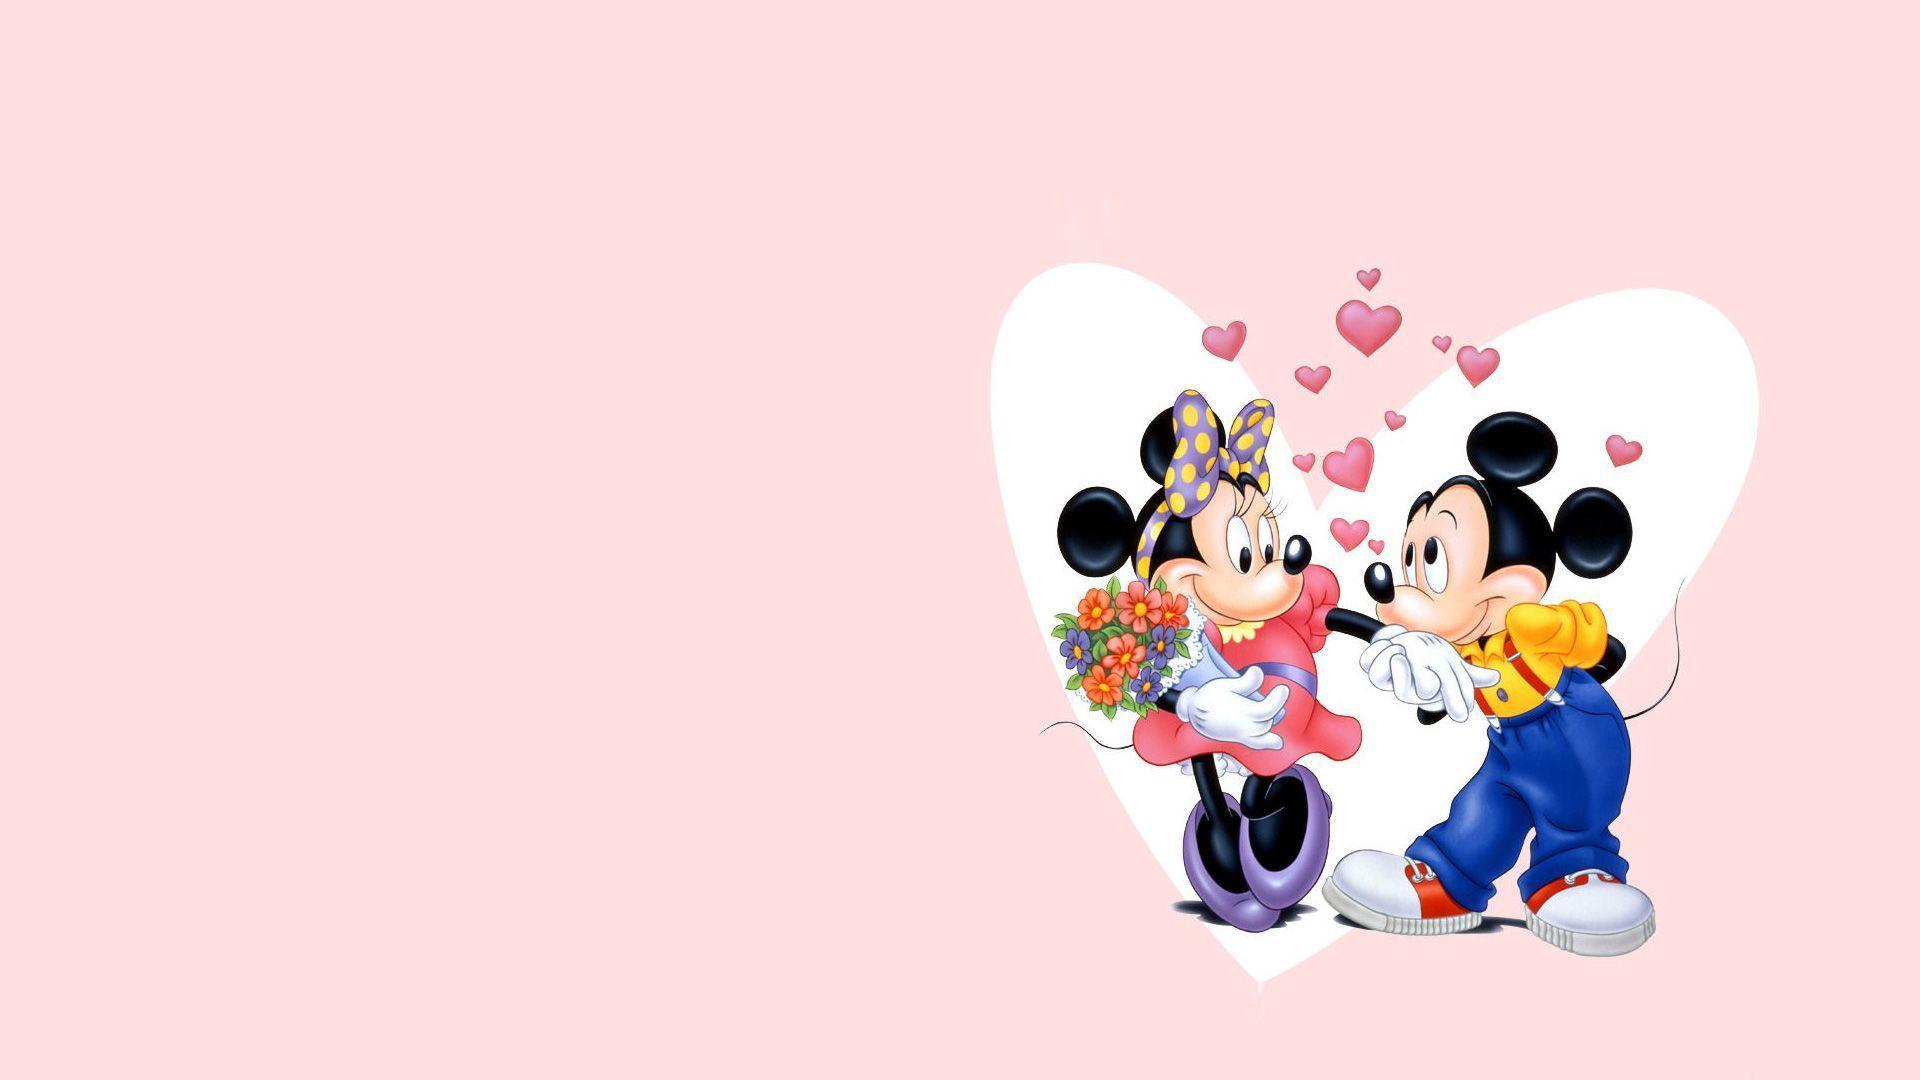 Romantic Mickey And Minnie Mouse Wallpaper HD. Foolhardi